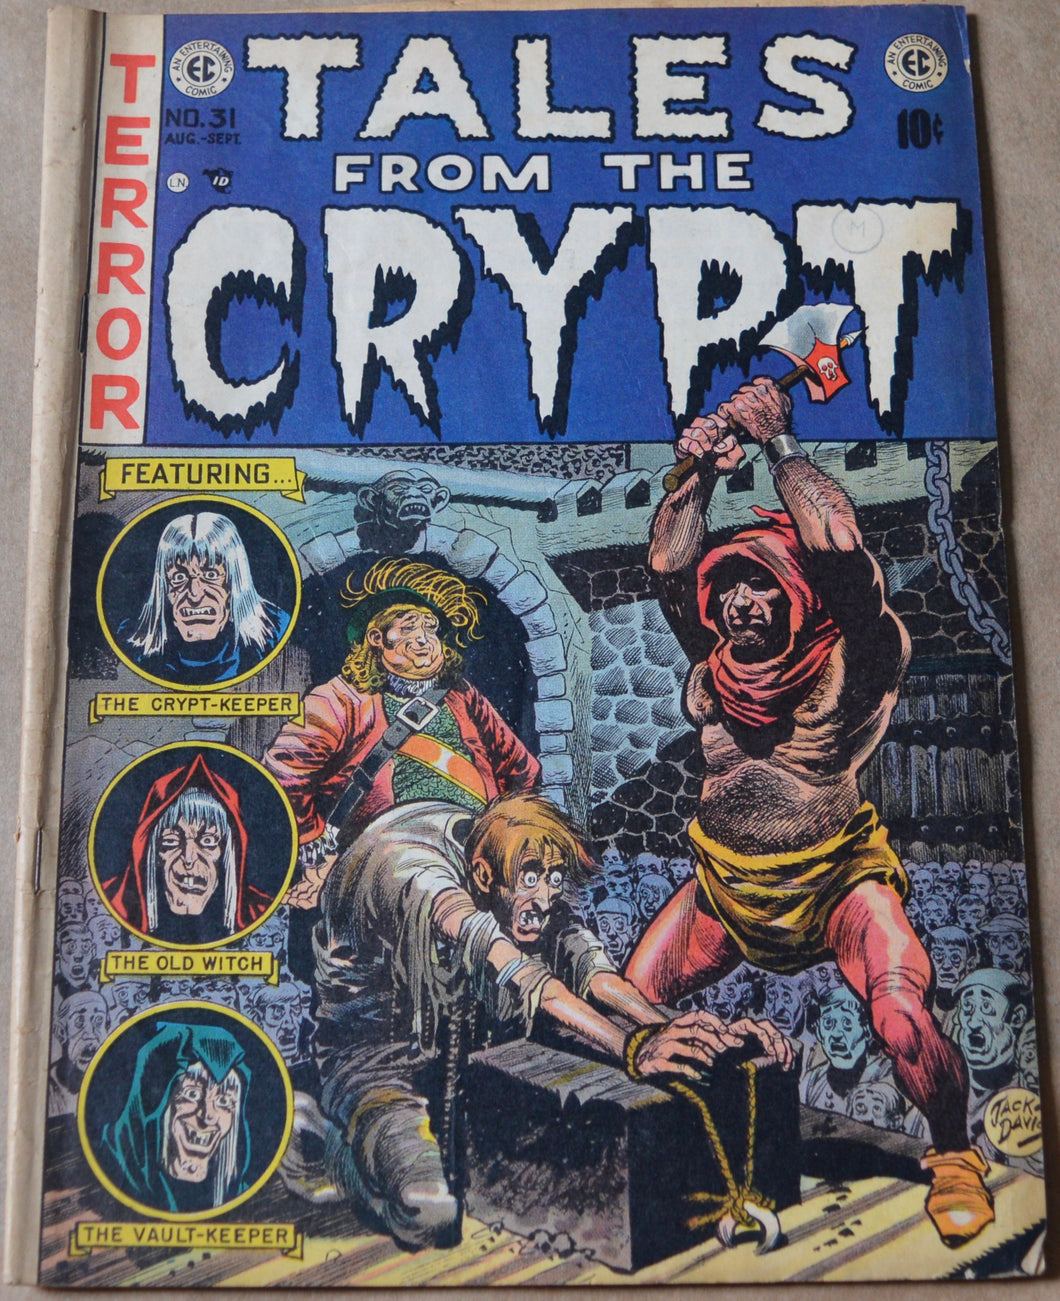 Tales From the Crypt #31 (EC, 1952) Al Williamson's first art for EC. HORROR!